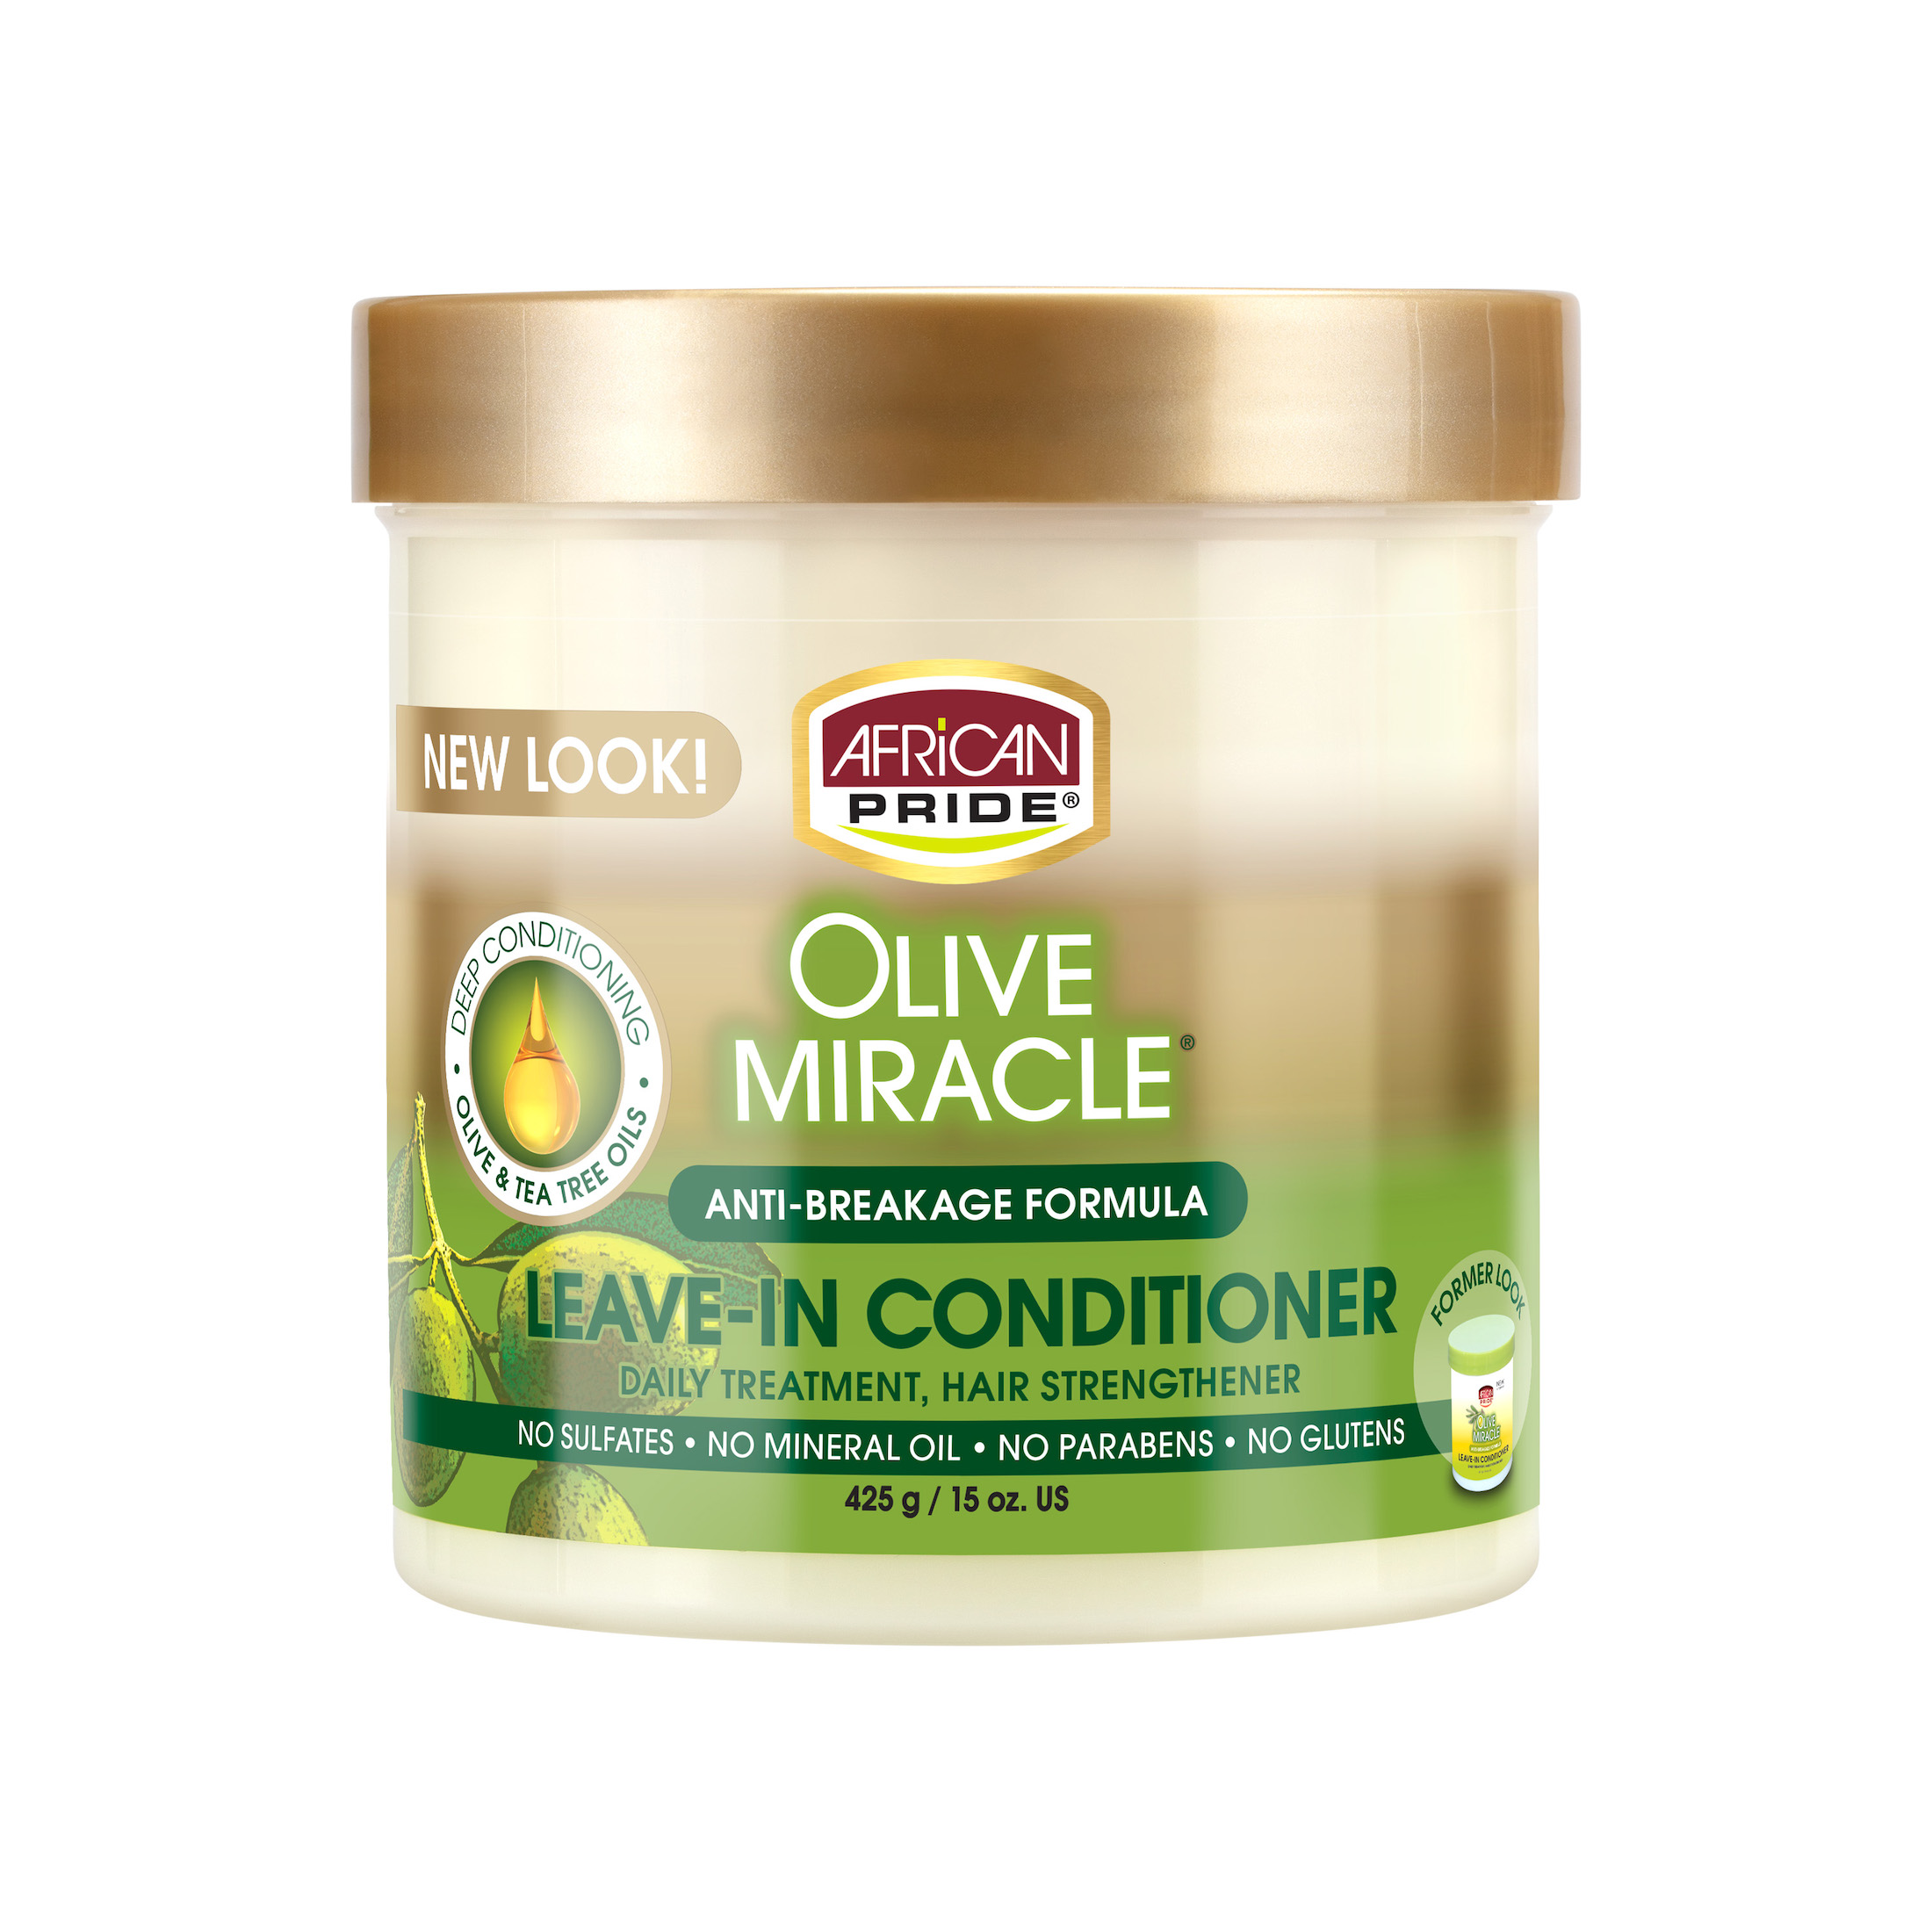 African Pride Olive Miracle Leave-in Conditioner 15 oz - image 1 of 7